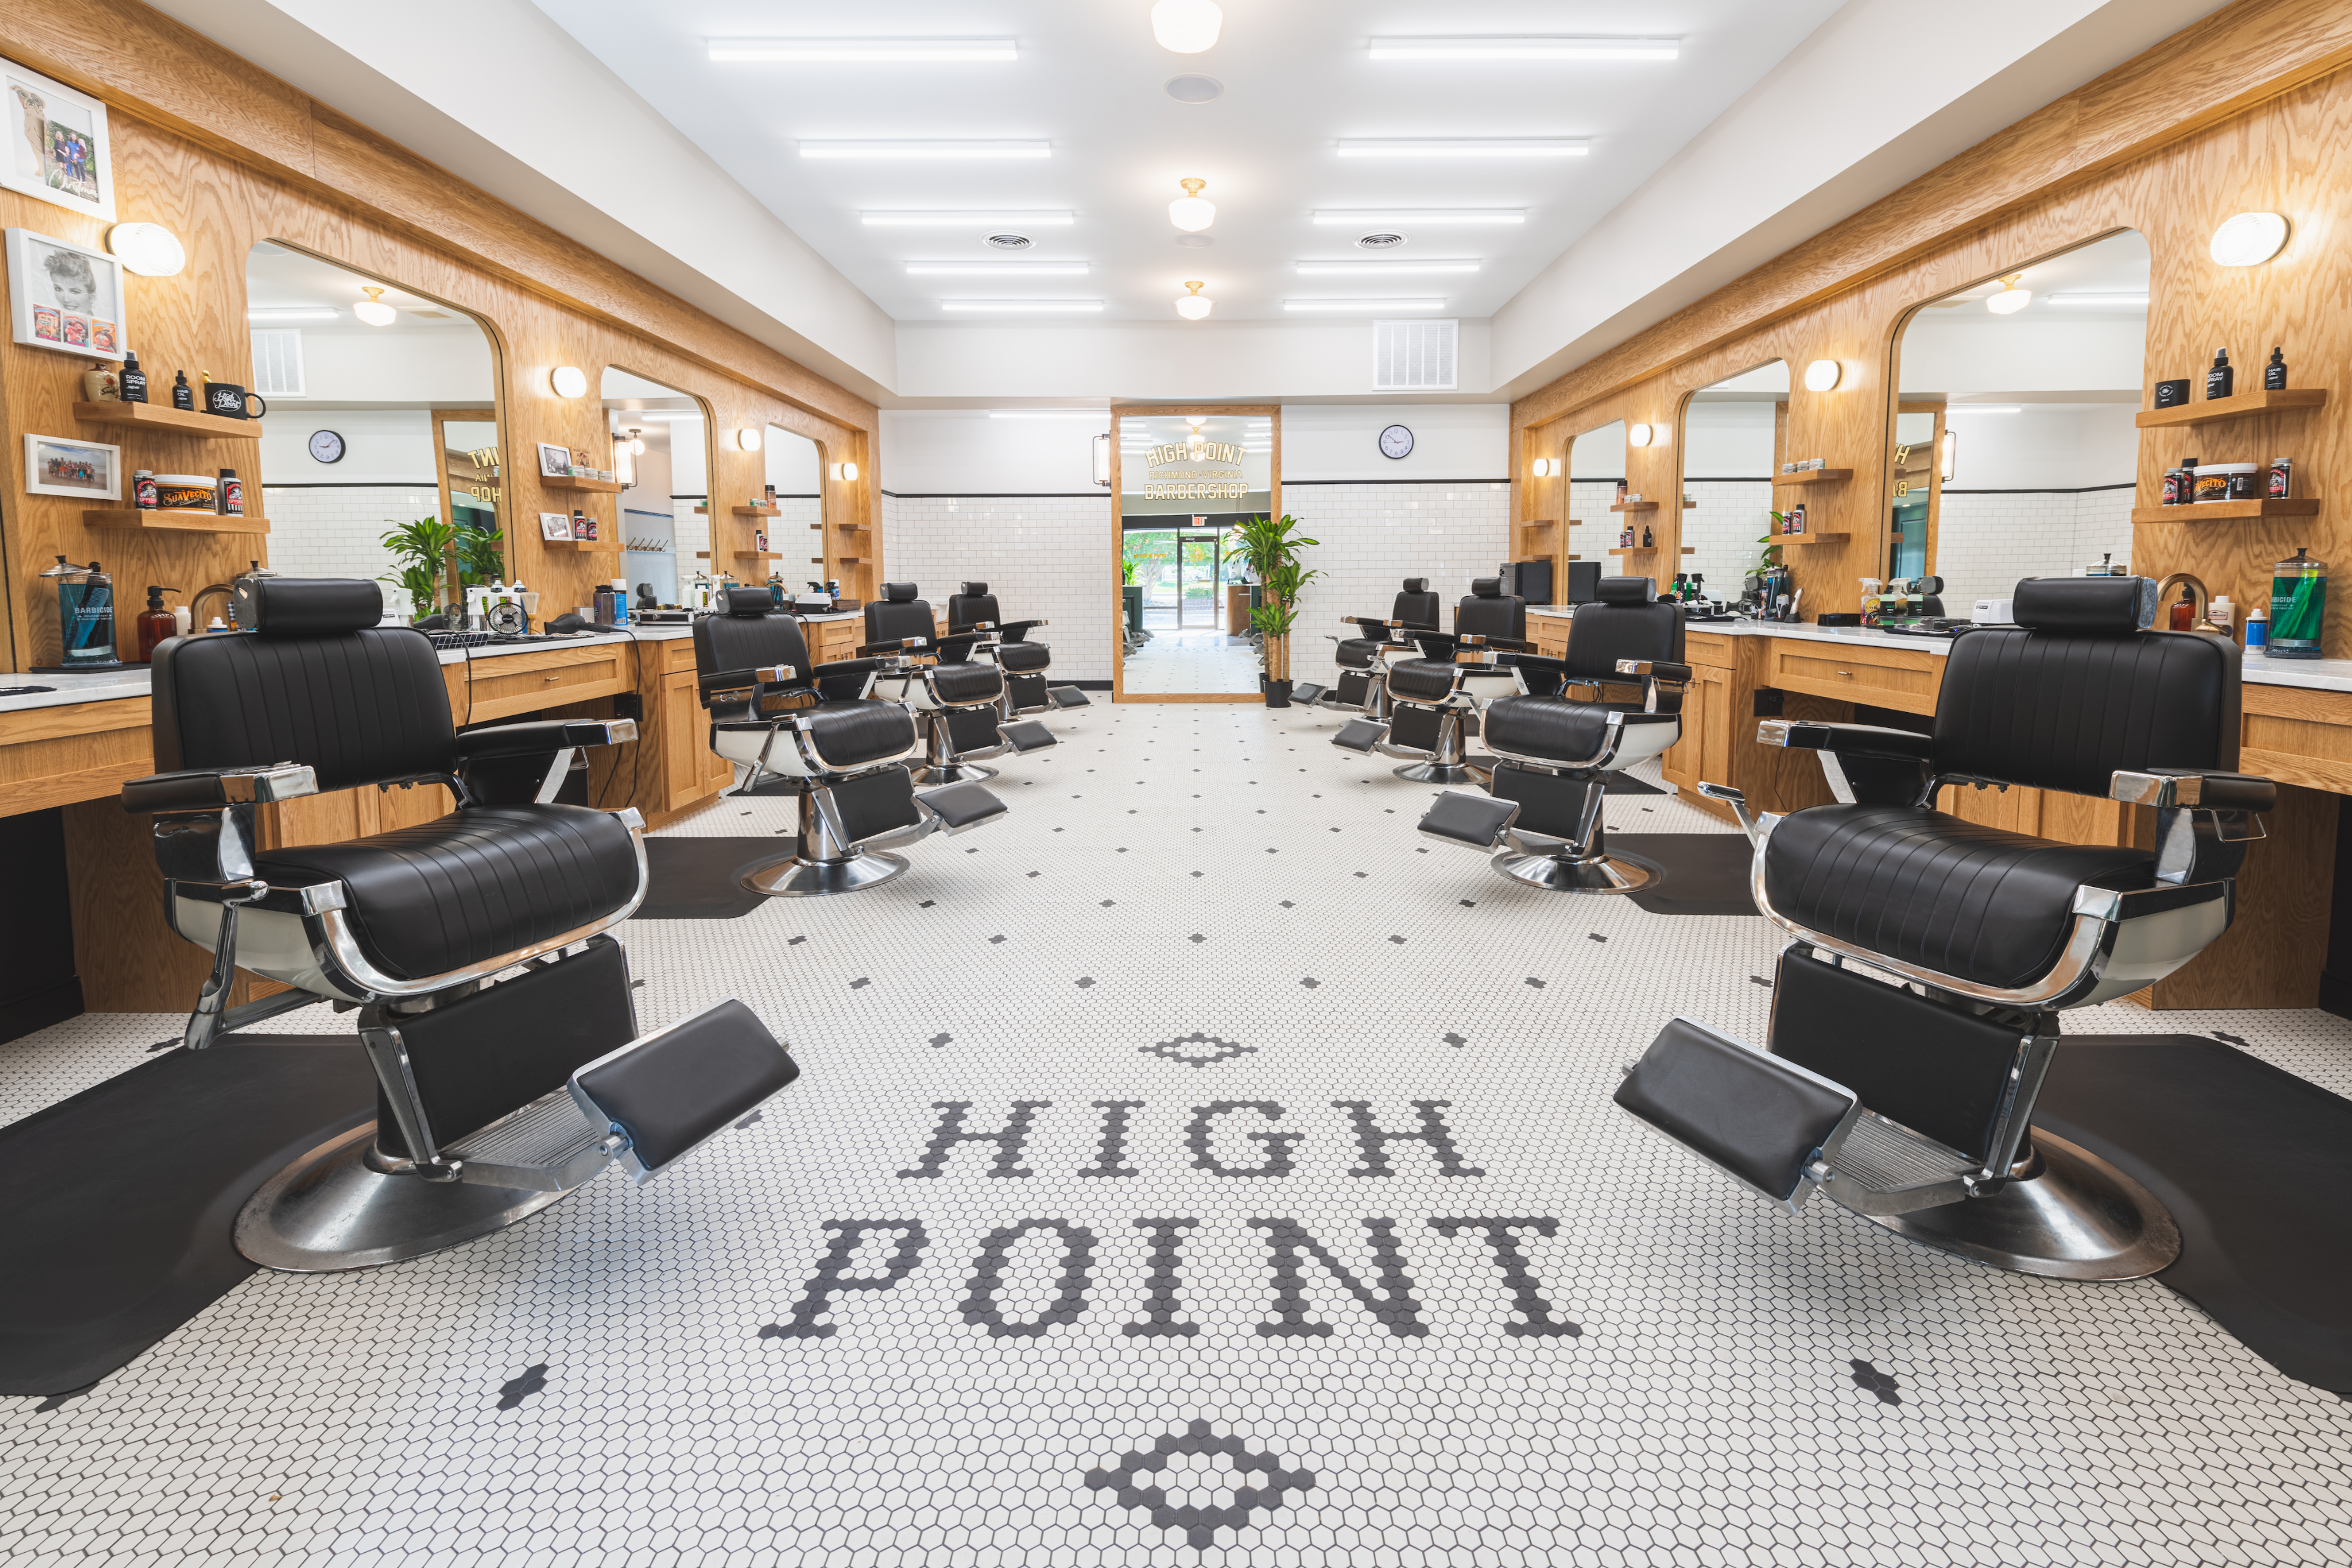 The High Point Barbershop